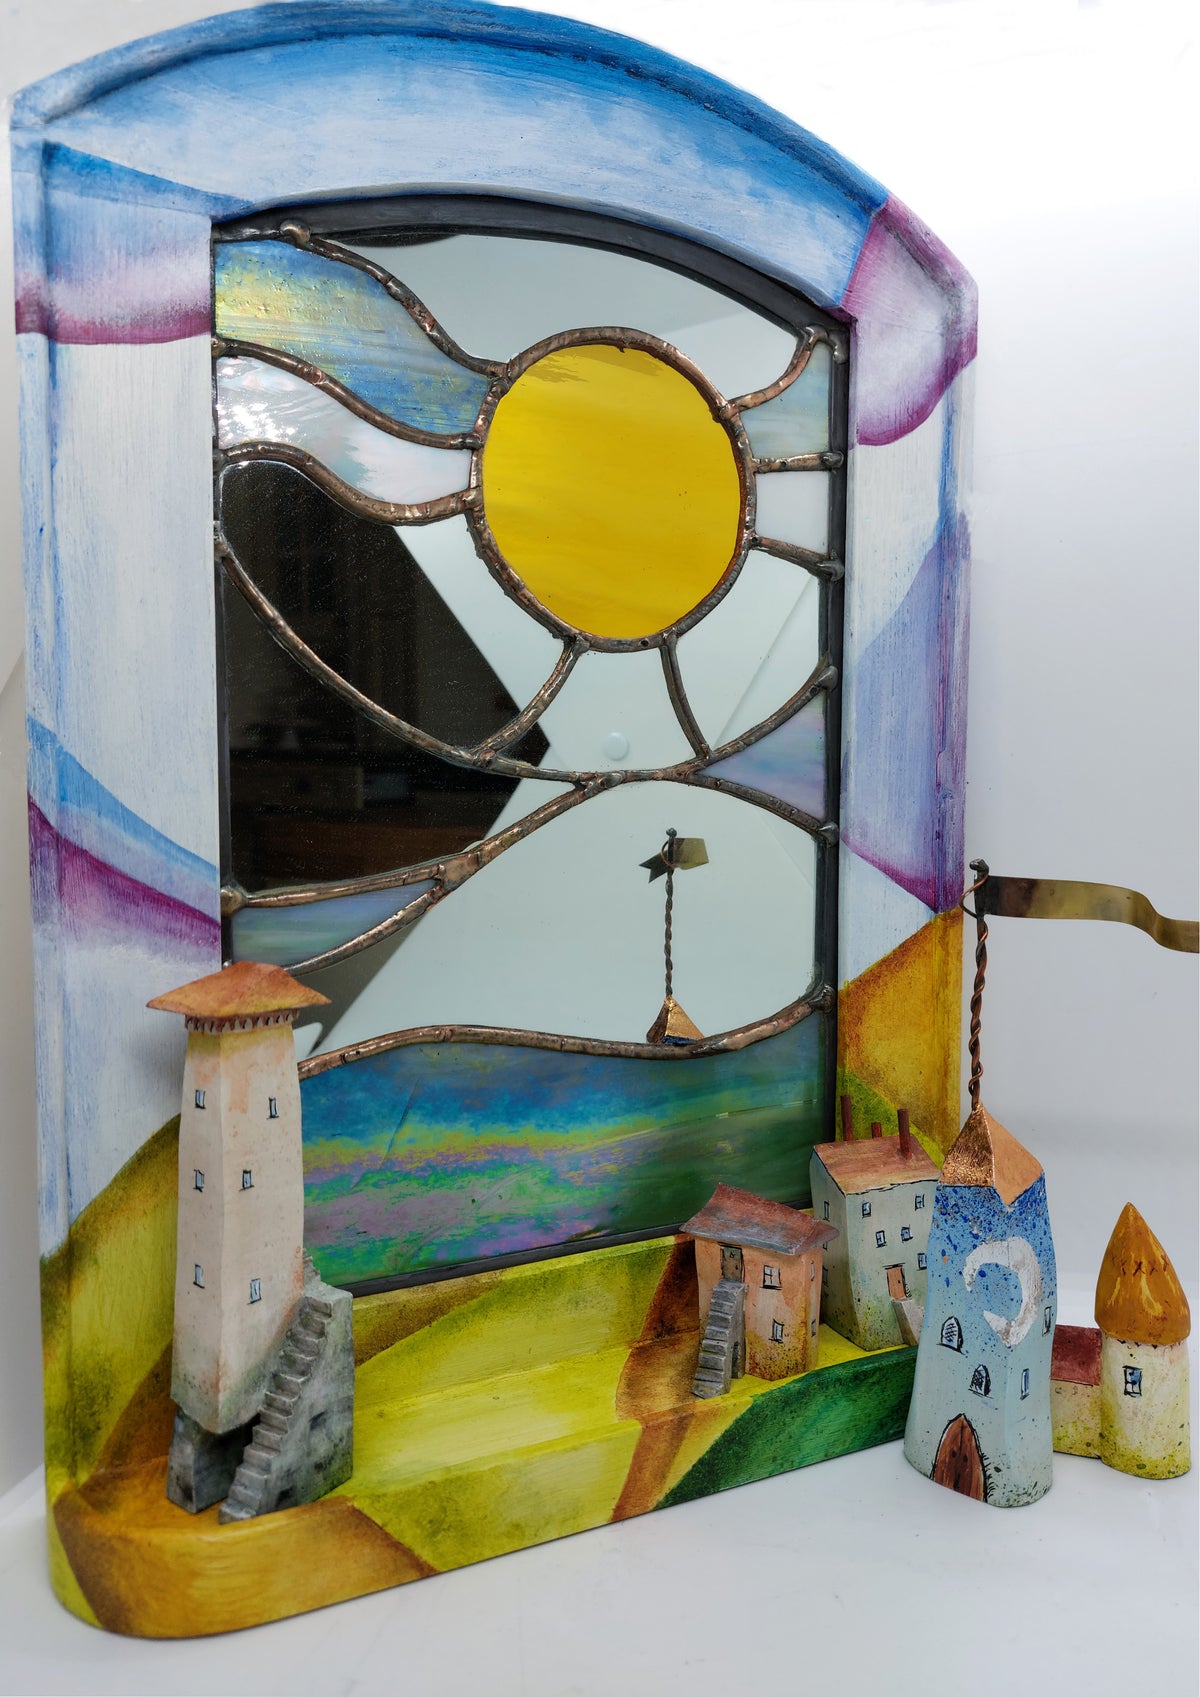 Mirror with houses, stained glass by Bryan Smith